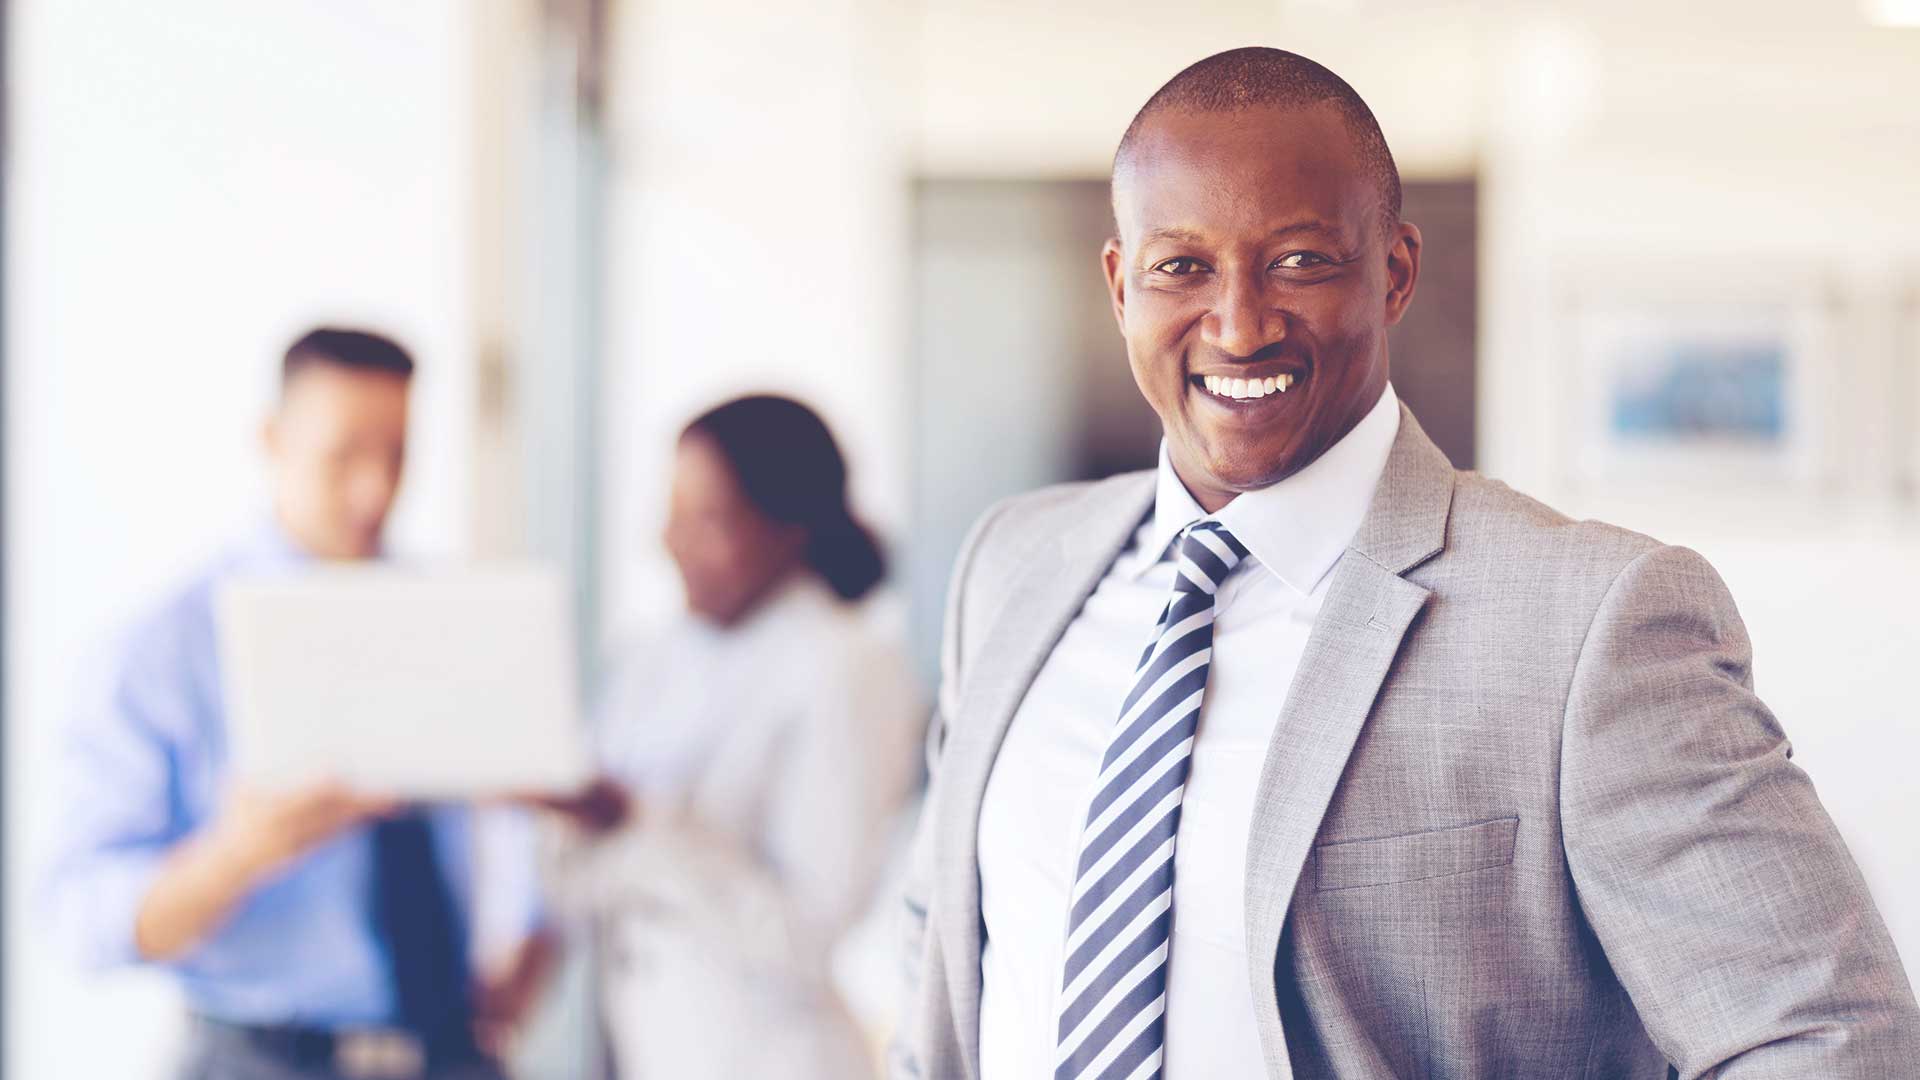 Black man in suit smiling at the camera